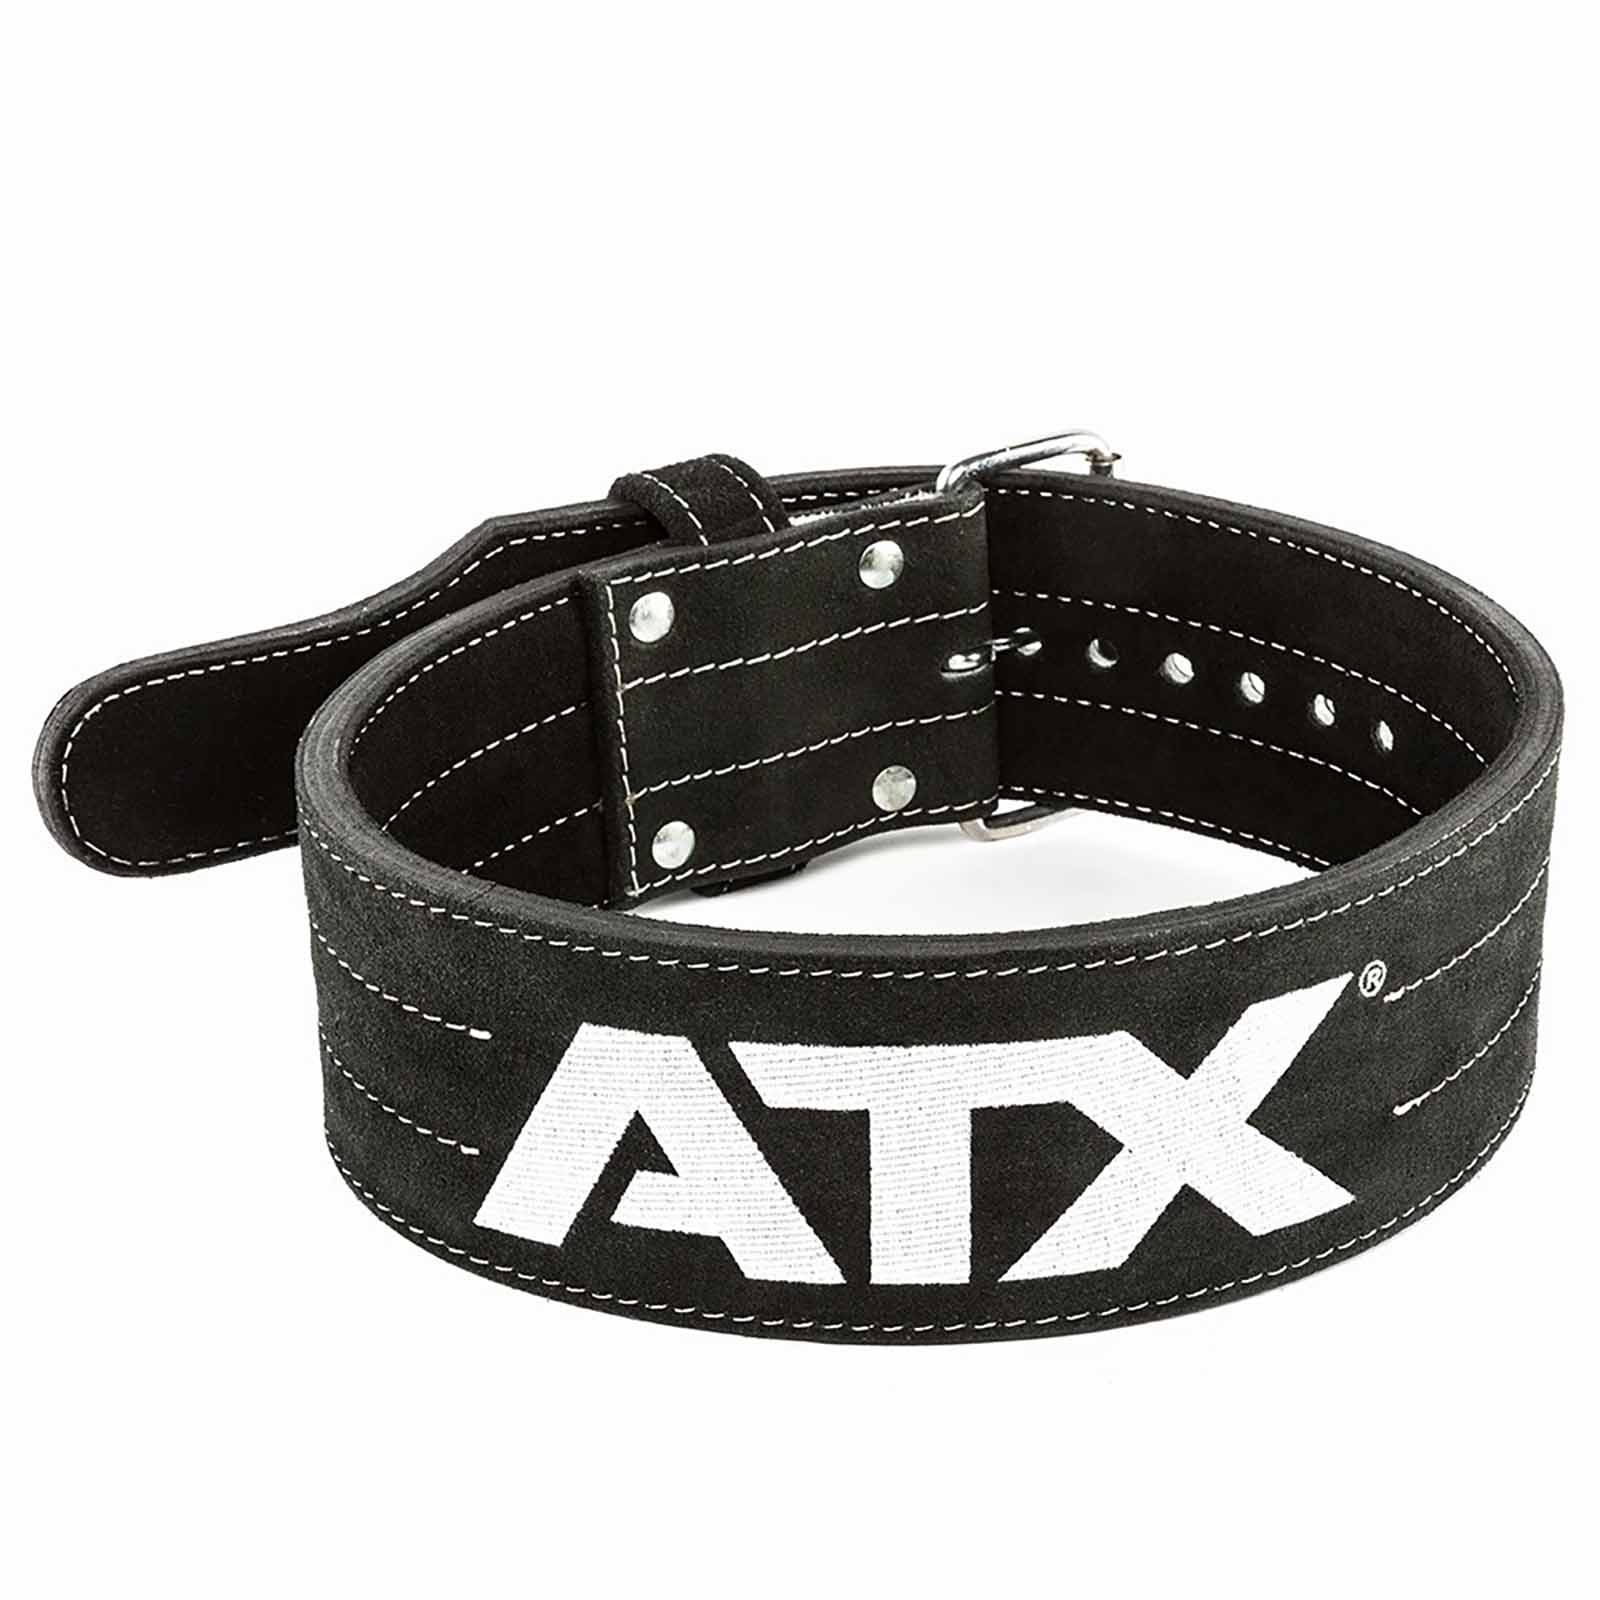 Leather Weightlifting Belt For Hardcore Lifting Enthusiasts – RAD